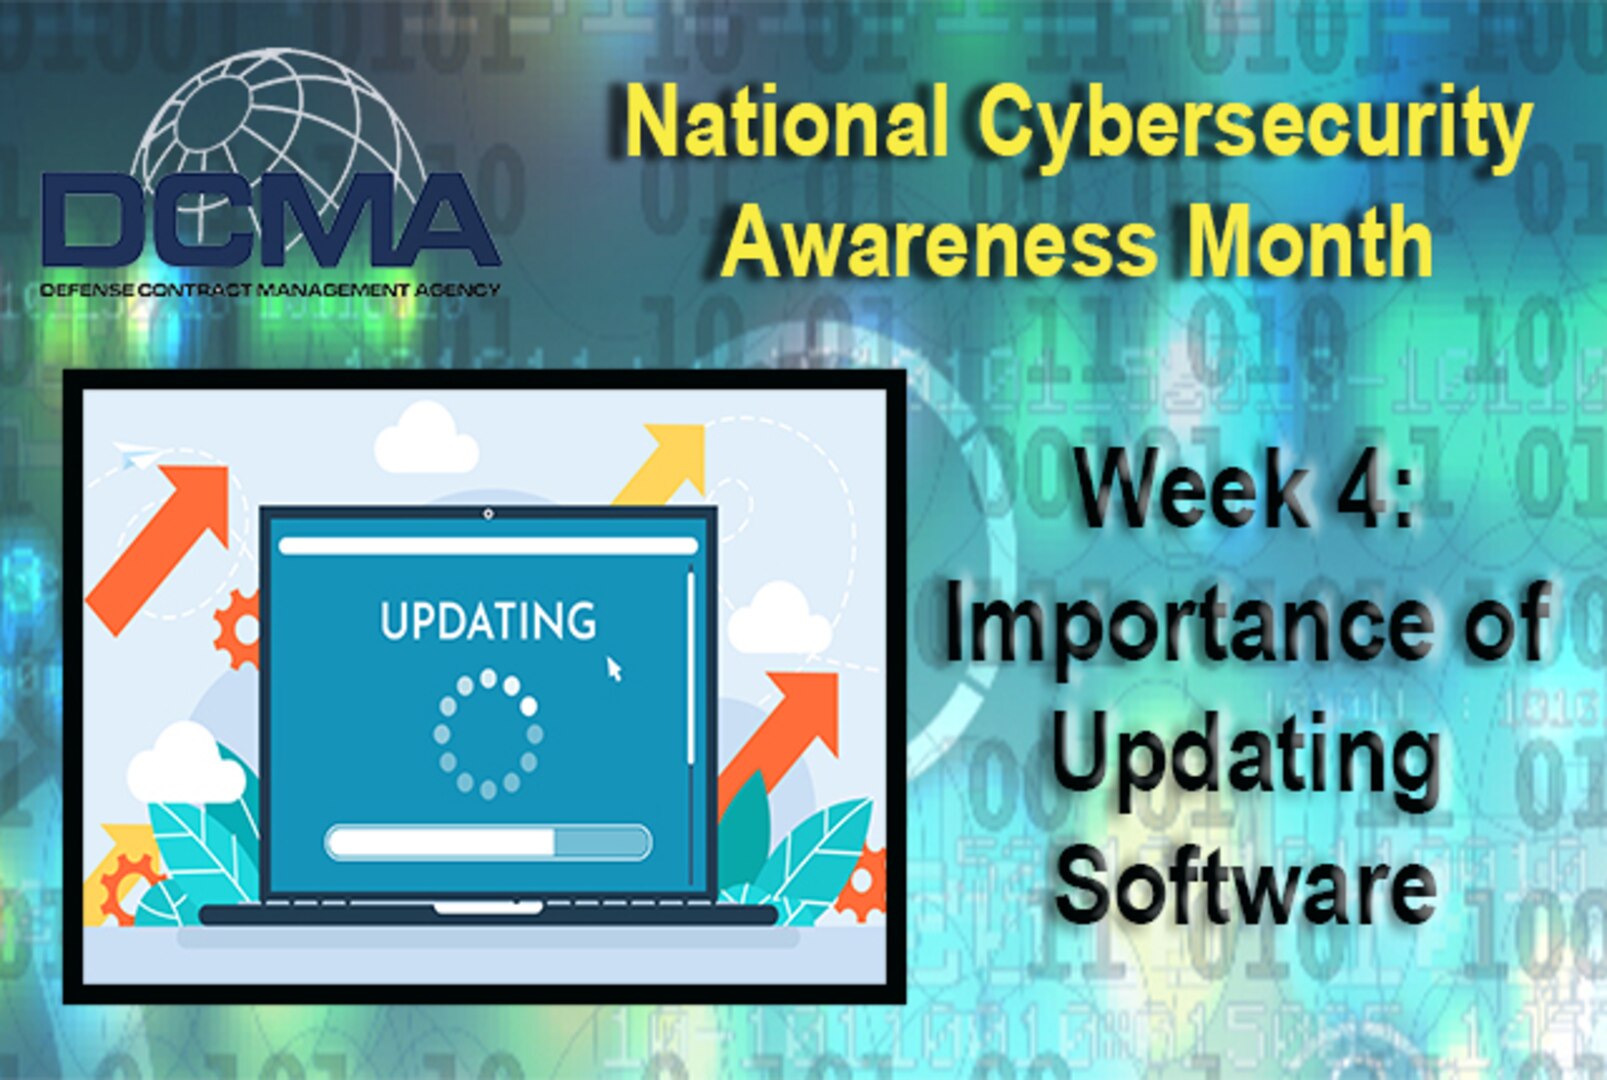 Graphic depicting National Cybersecurity Awareness Month Week 4.